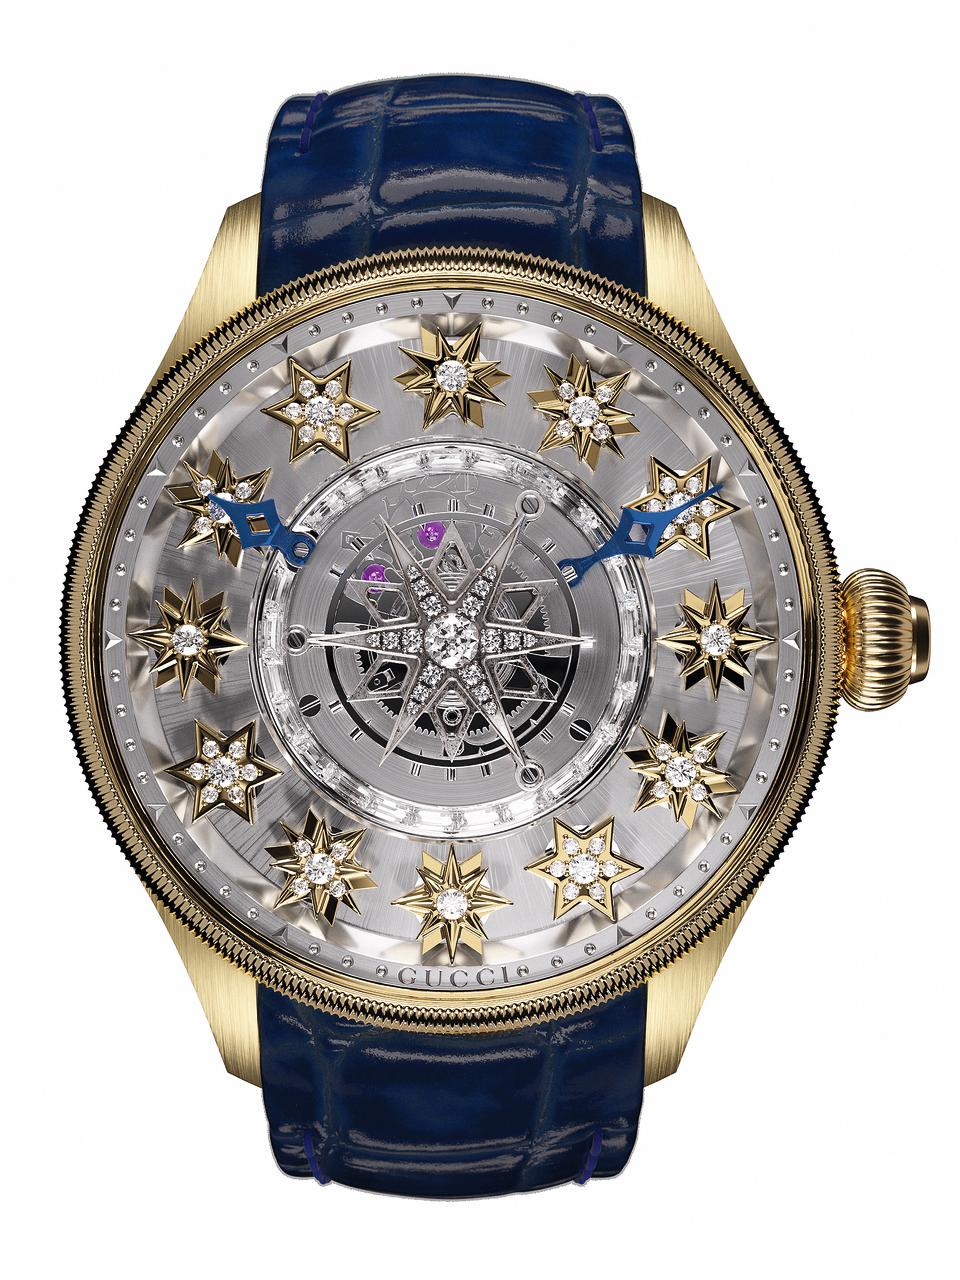 A new version of the G-Timeless Planetarium timepiece part of Gucci's third high watchmaking collection.